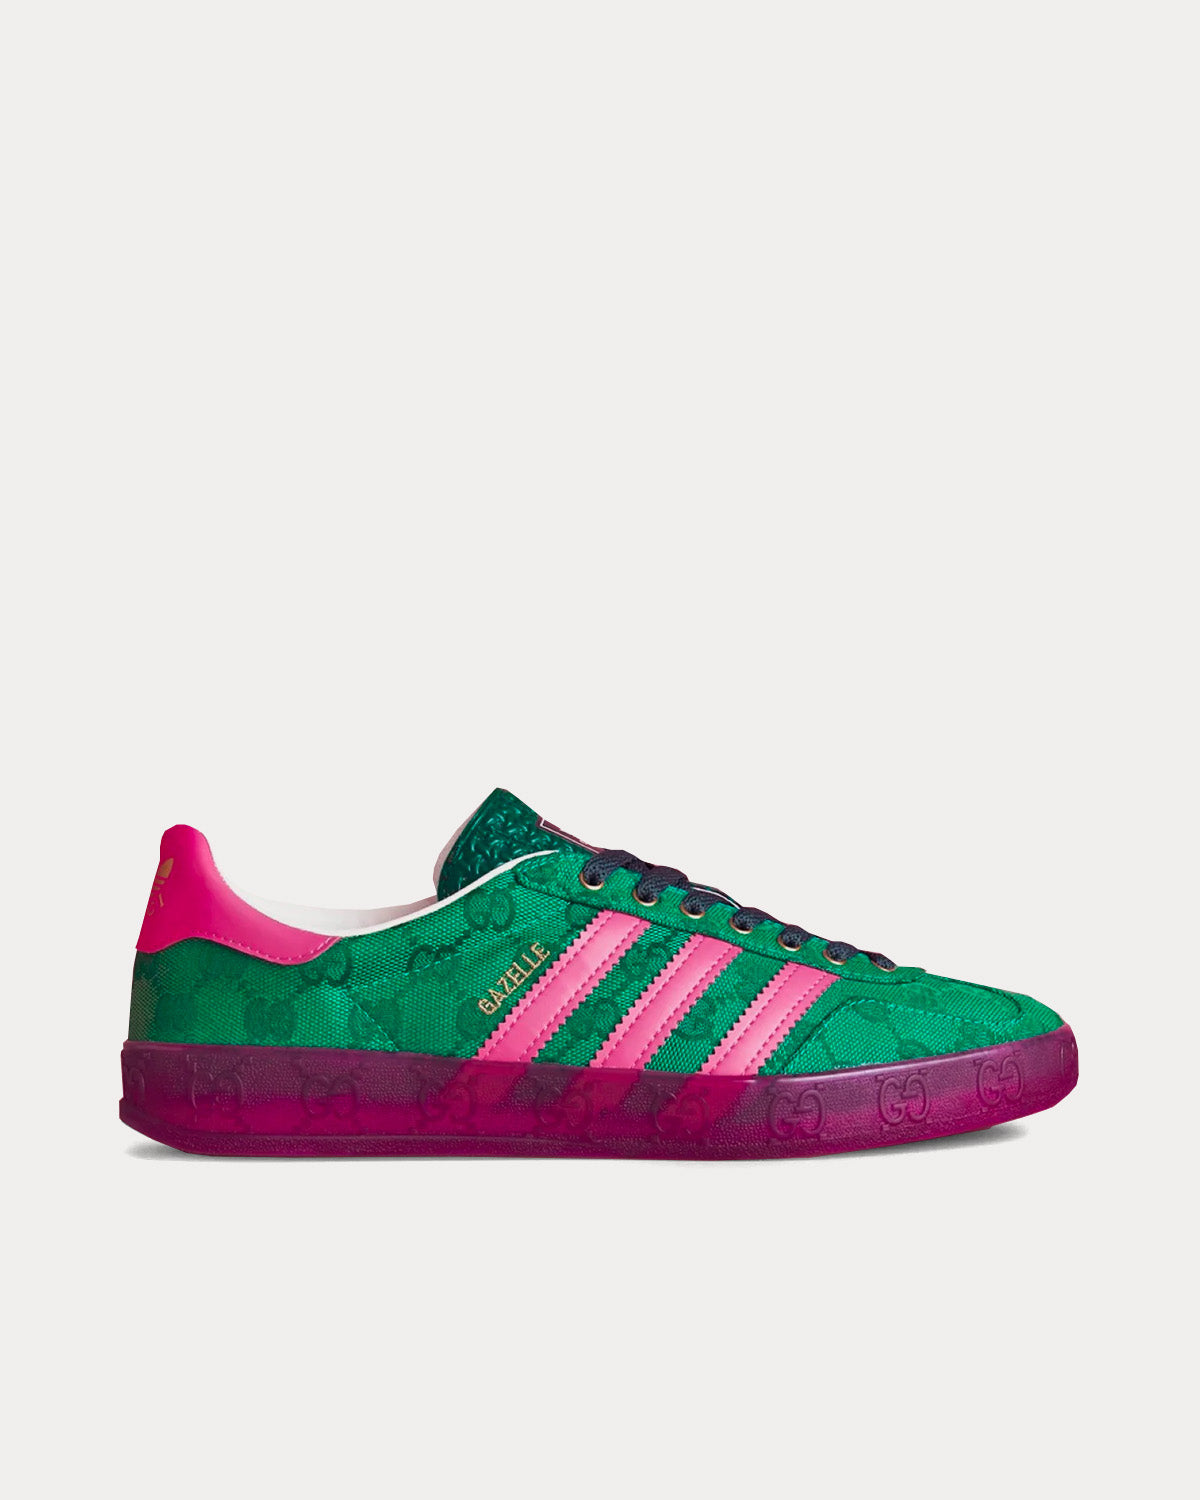 Adidas x Gucci - Gazelle Original GG Canvas Green / Pink Low Top Sneakers